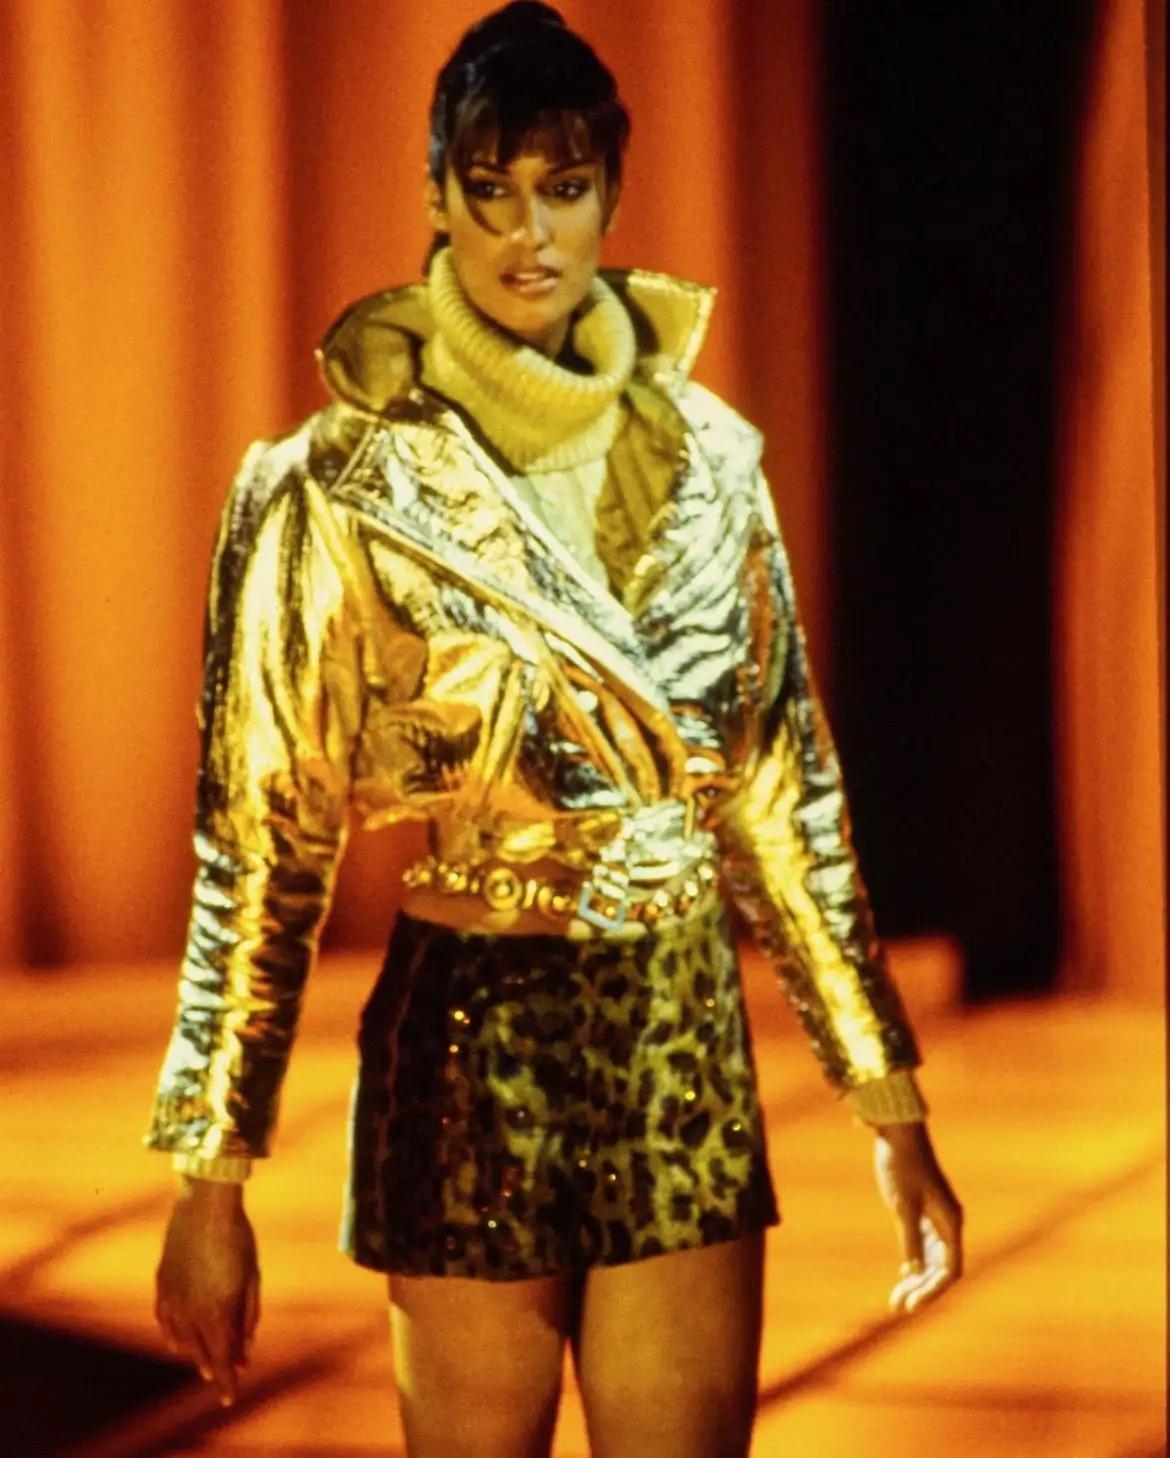 Presenting an incredible gold-colored Gianni Versace turtleneck sweater, designed by Gianni Versace. From the Fall/Winter 1994 collection, this sweater debuted on the season's runway as part of look 71 modeled by Yasmeen Ghauri. Similar cable knit